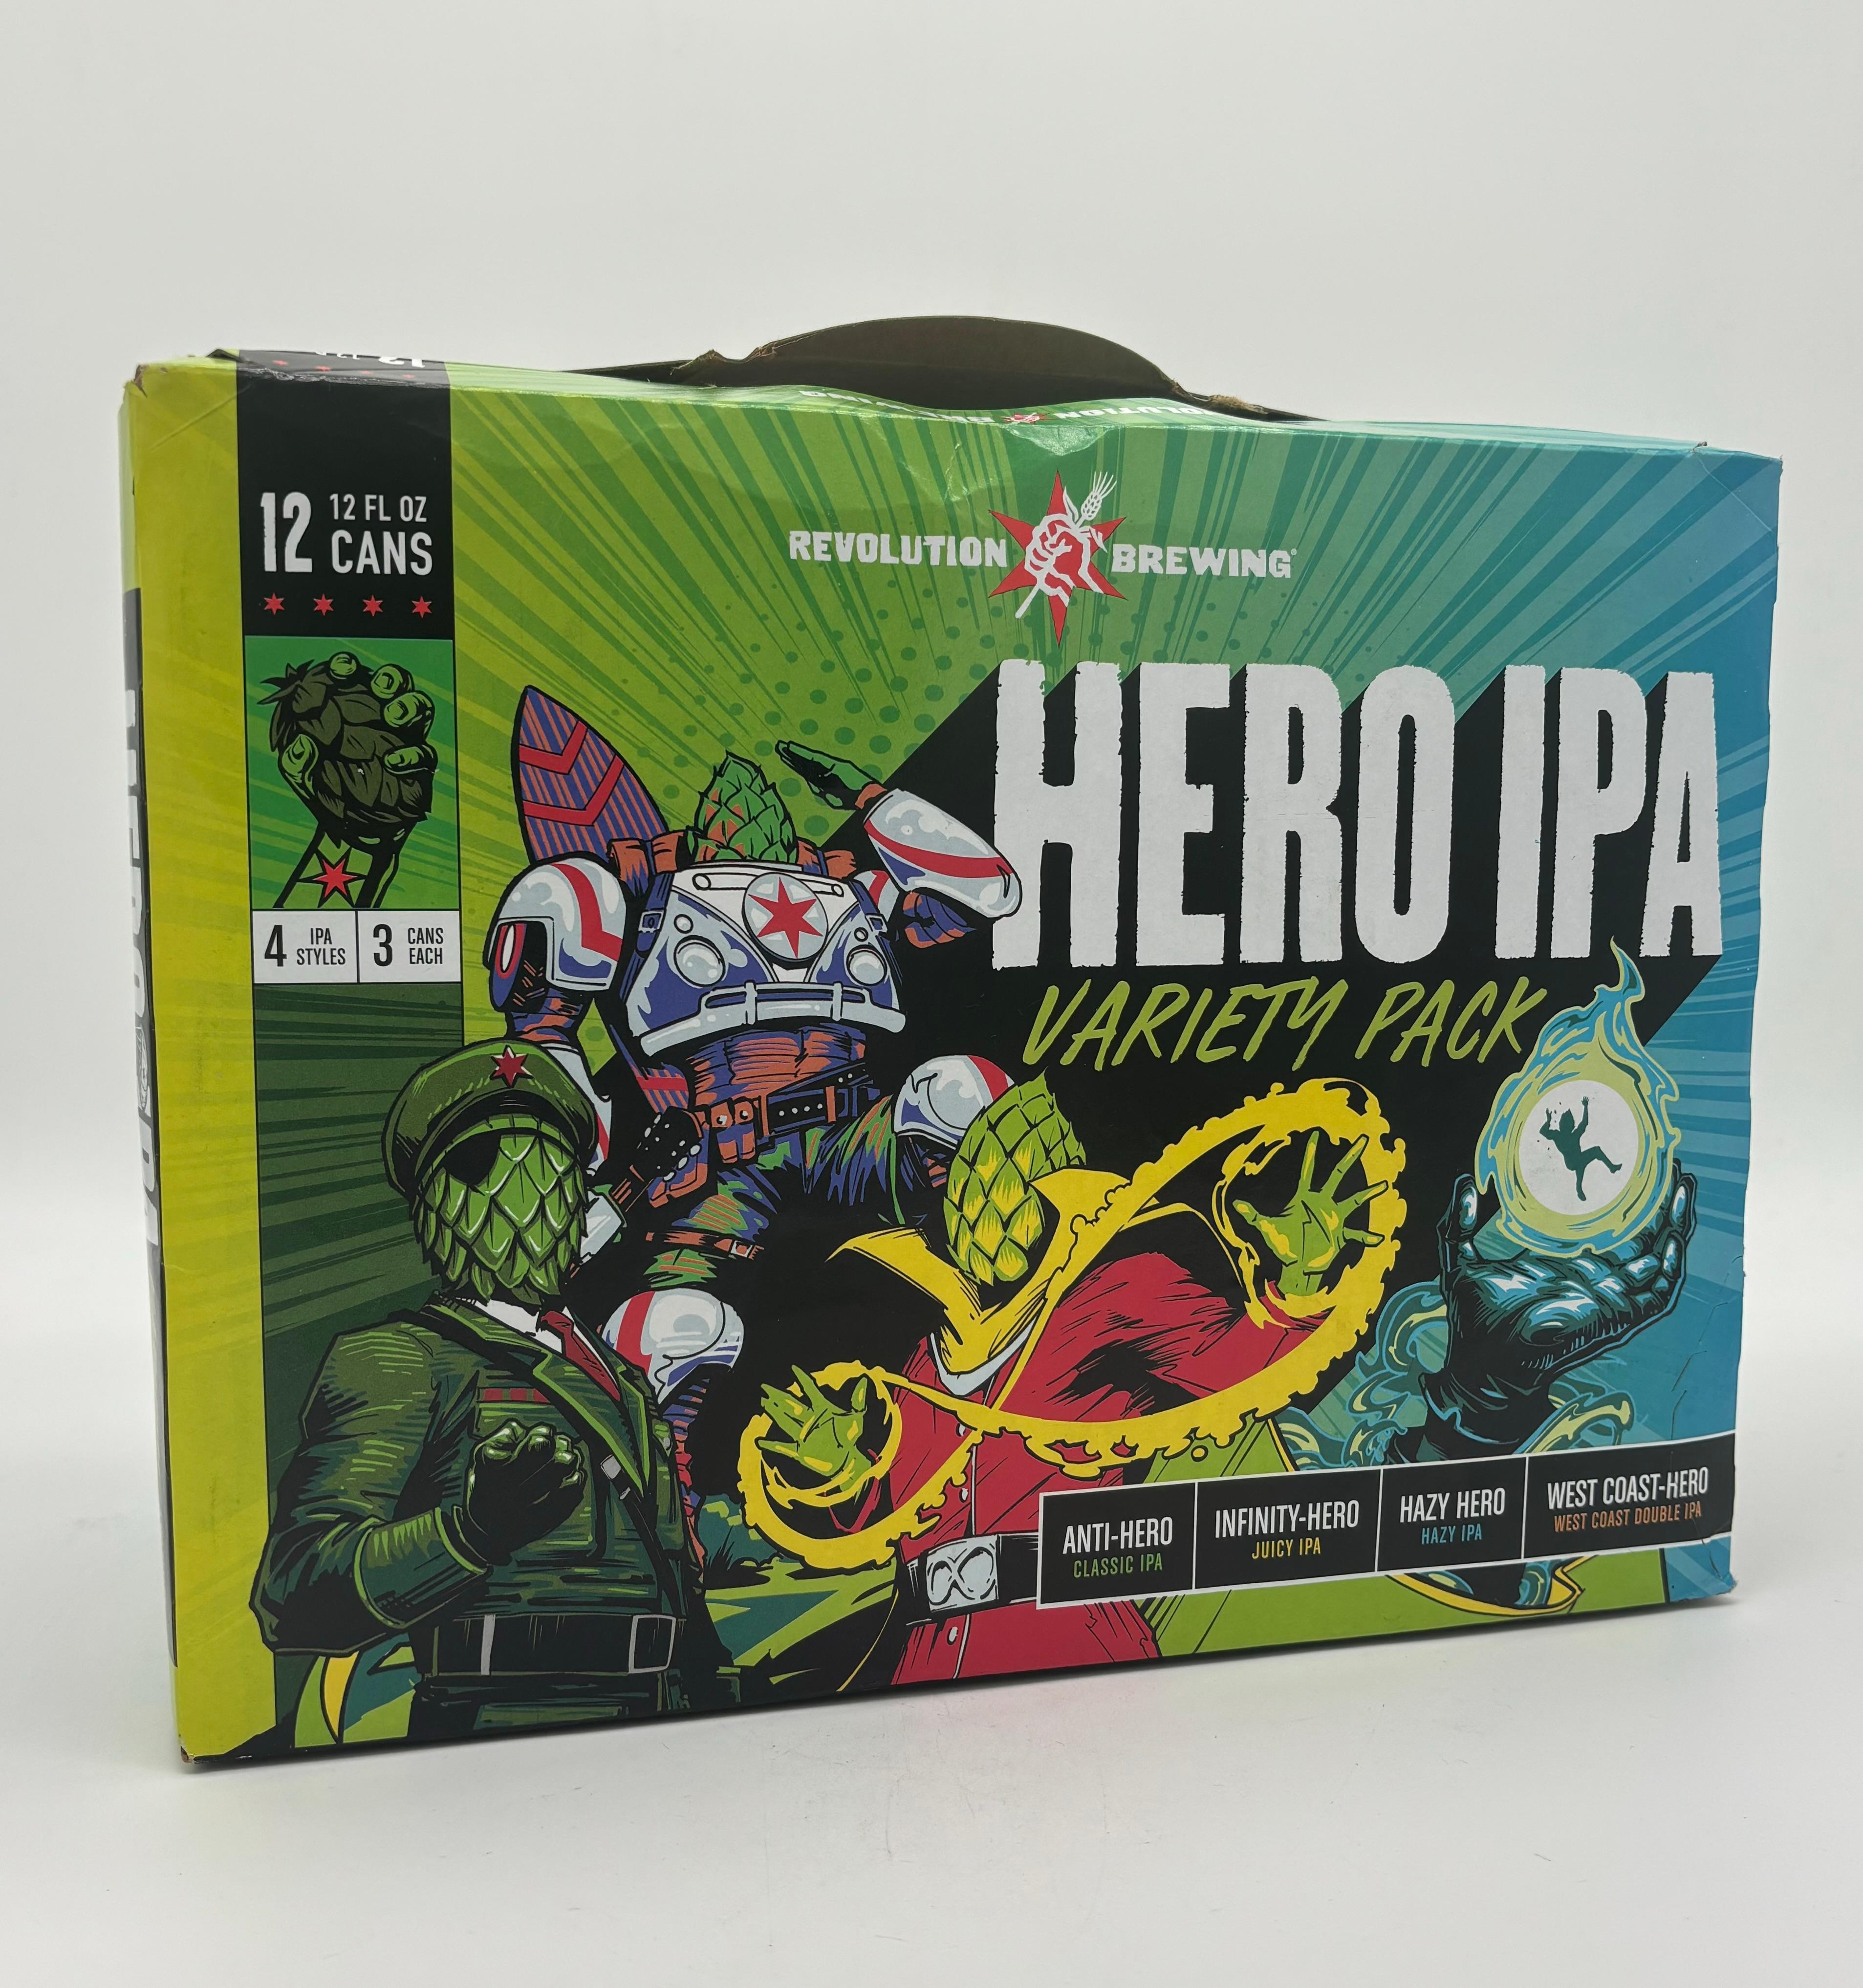 Revolution - Hero IPA Variety Pack (12pk of 12oz Cans)